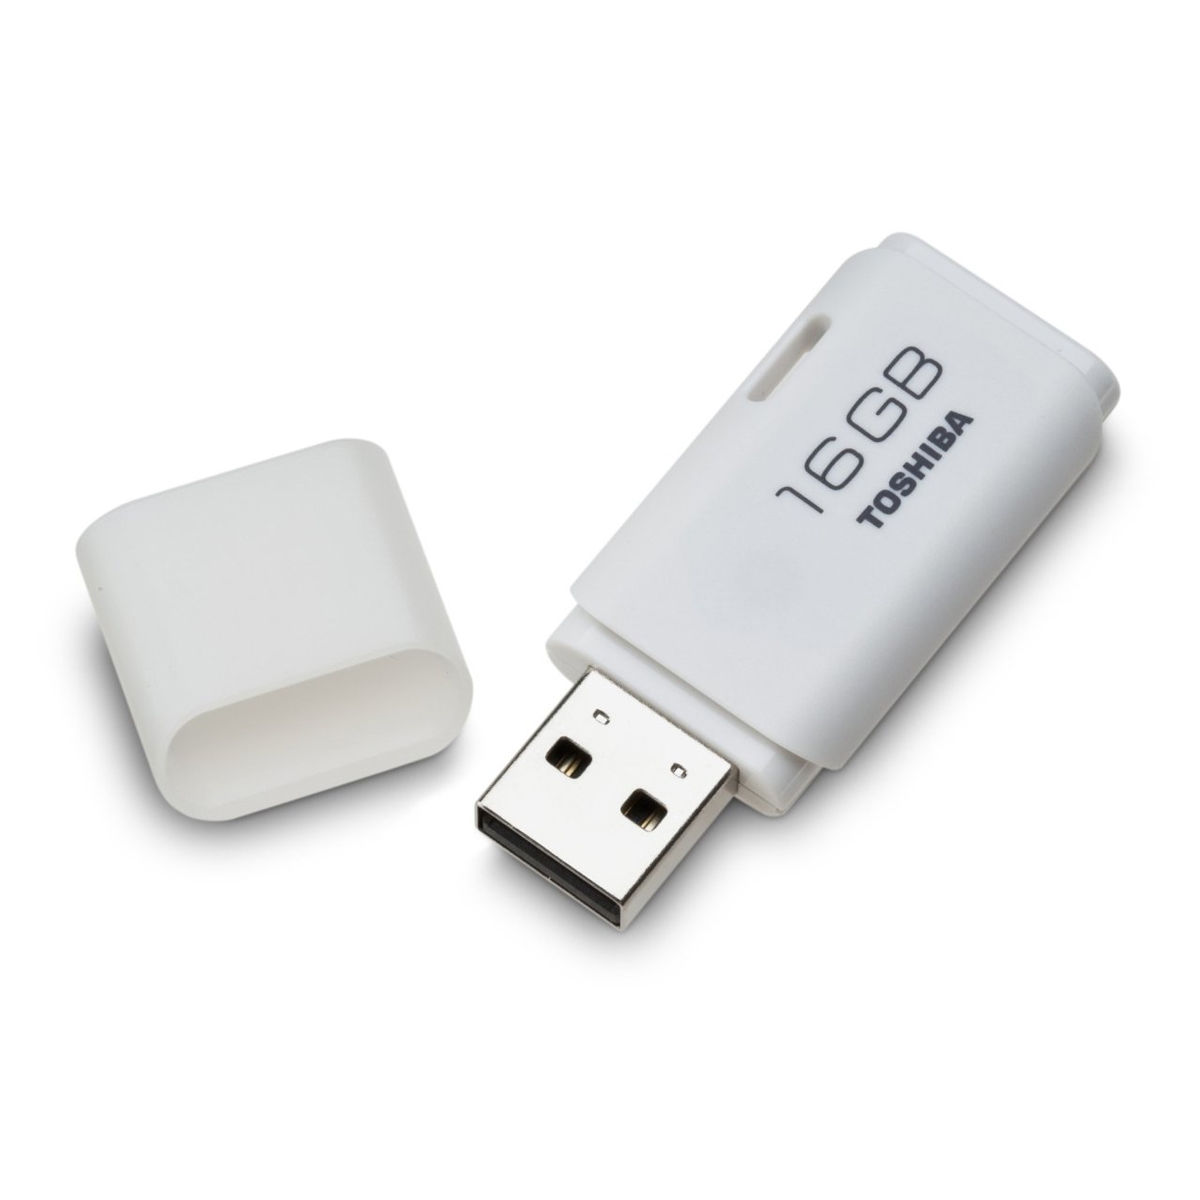 completely reformat usb drive